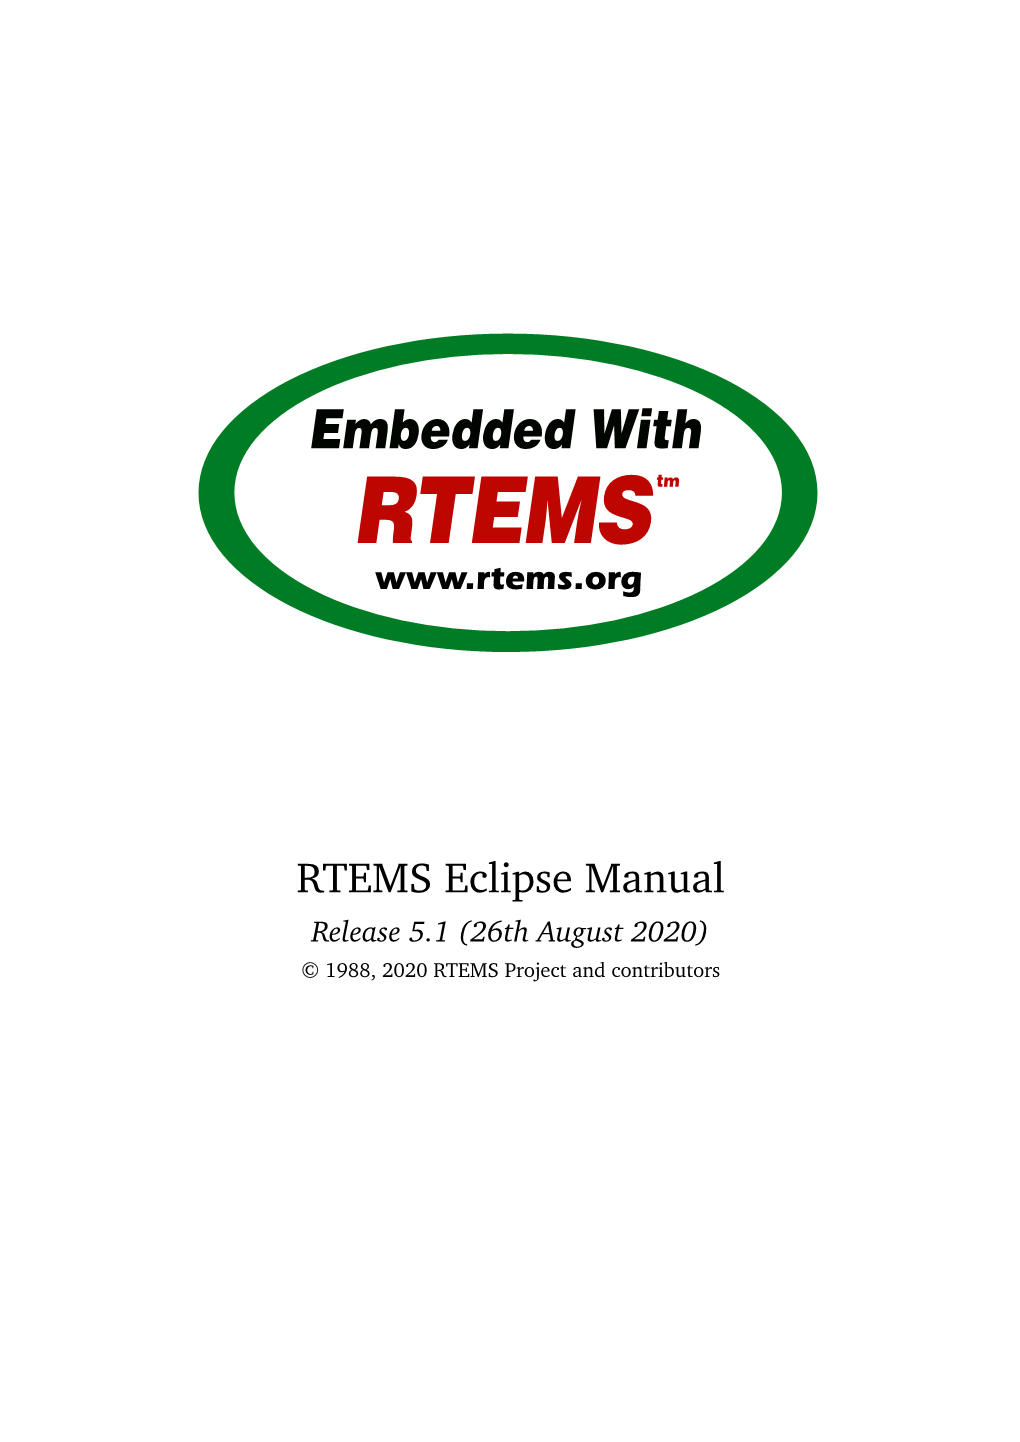 RTEMS Eclipse Manual Release 5.1 (26Th August 2020) © 1988, 2020 RTEMS Project and Contributors